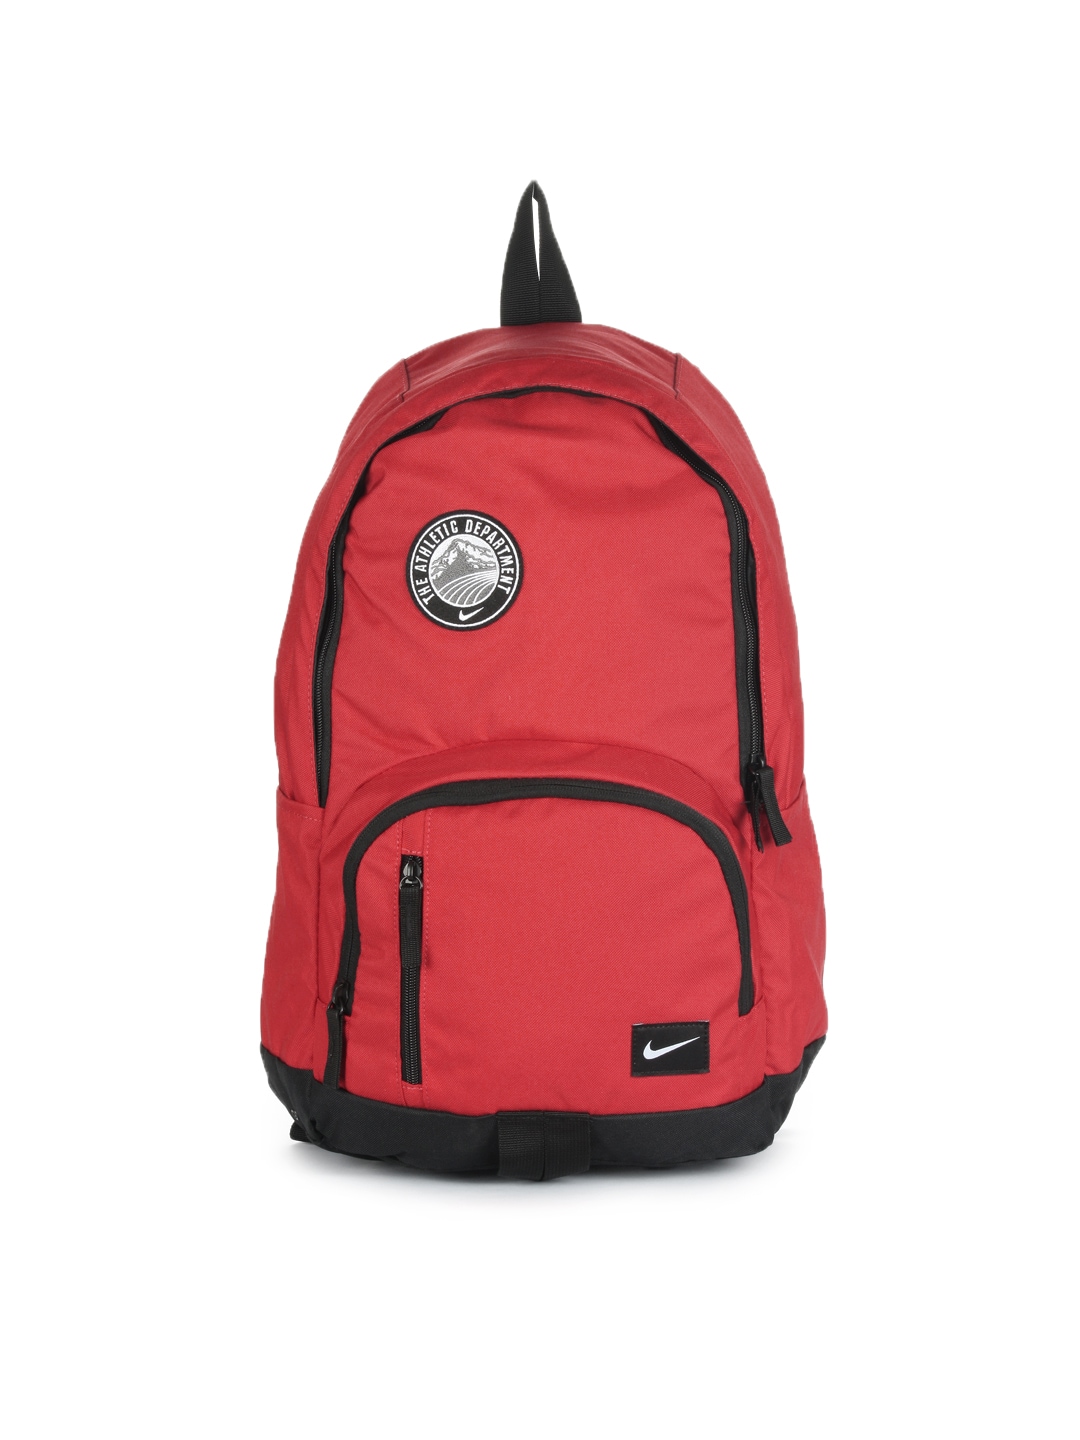 Nike Unisex Casual Red Backpack